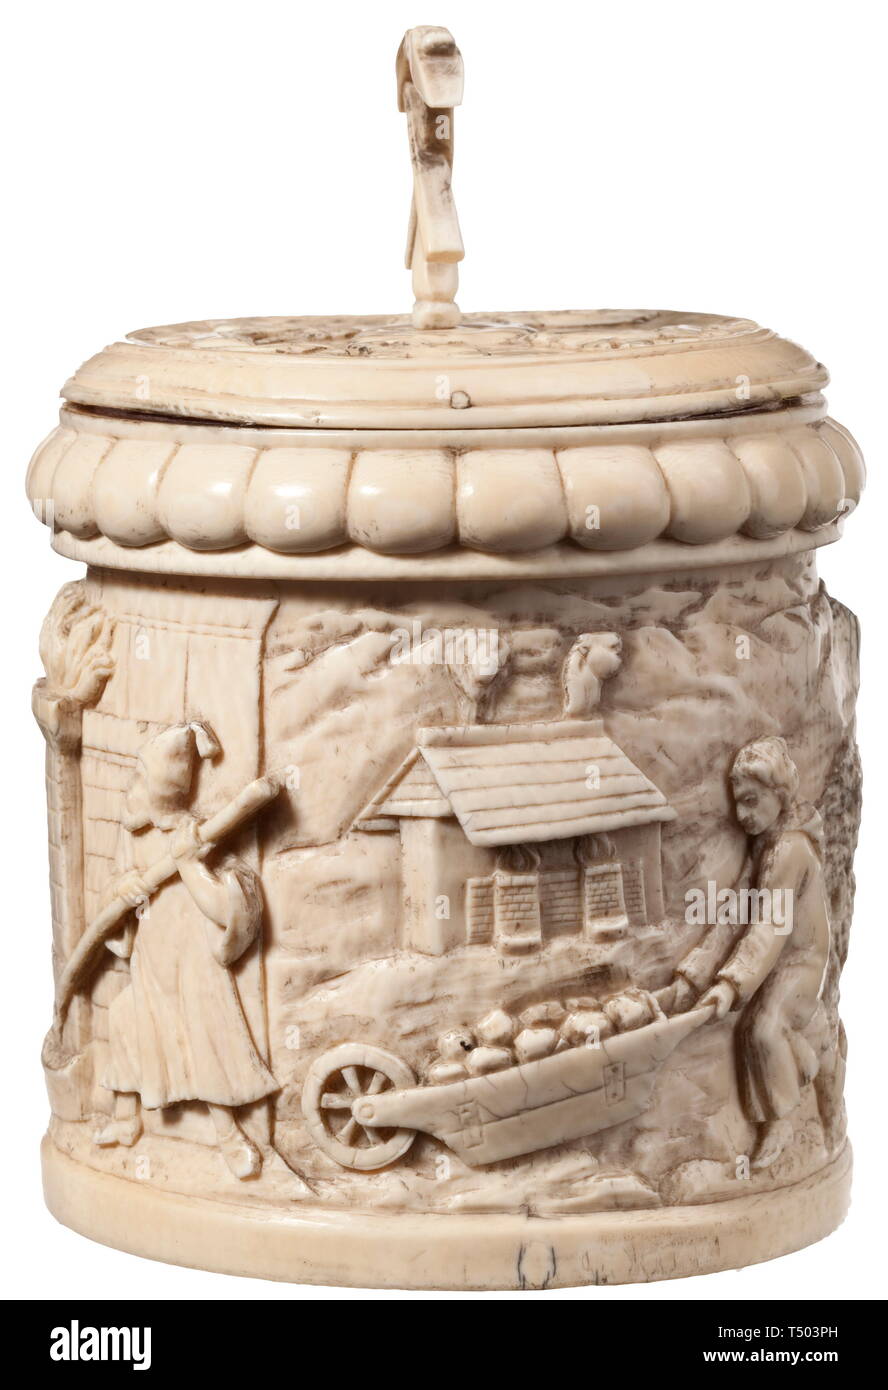 A Saxon ivory box with mining scenes , 1st half of the 18th century. The oval body carved with decorations in high relief. The exterior depicting the entrance of a mining tunnel with miners, transporting the ore in carts and crates. On the opposite side a furnace with tapping smeltery workers. The lid showing four miners with ore cars, the pommel in the shape of two crossed club hammers. Height 13.5 cm. historic, historical, handicrafts, handcraft, craft, object, objects, stills, clipping, clippings, cut out, cut-out, cut-outs, 18th century, Additional-Rights-Clearance-Info-Not-Available Stock Photo